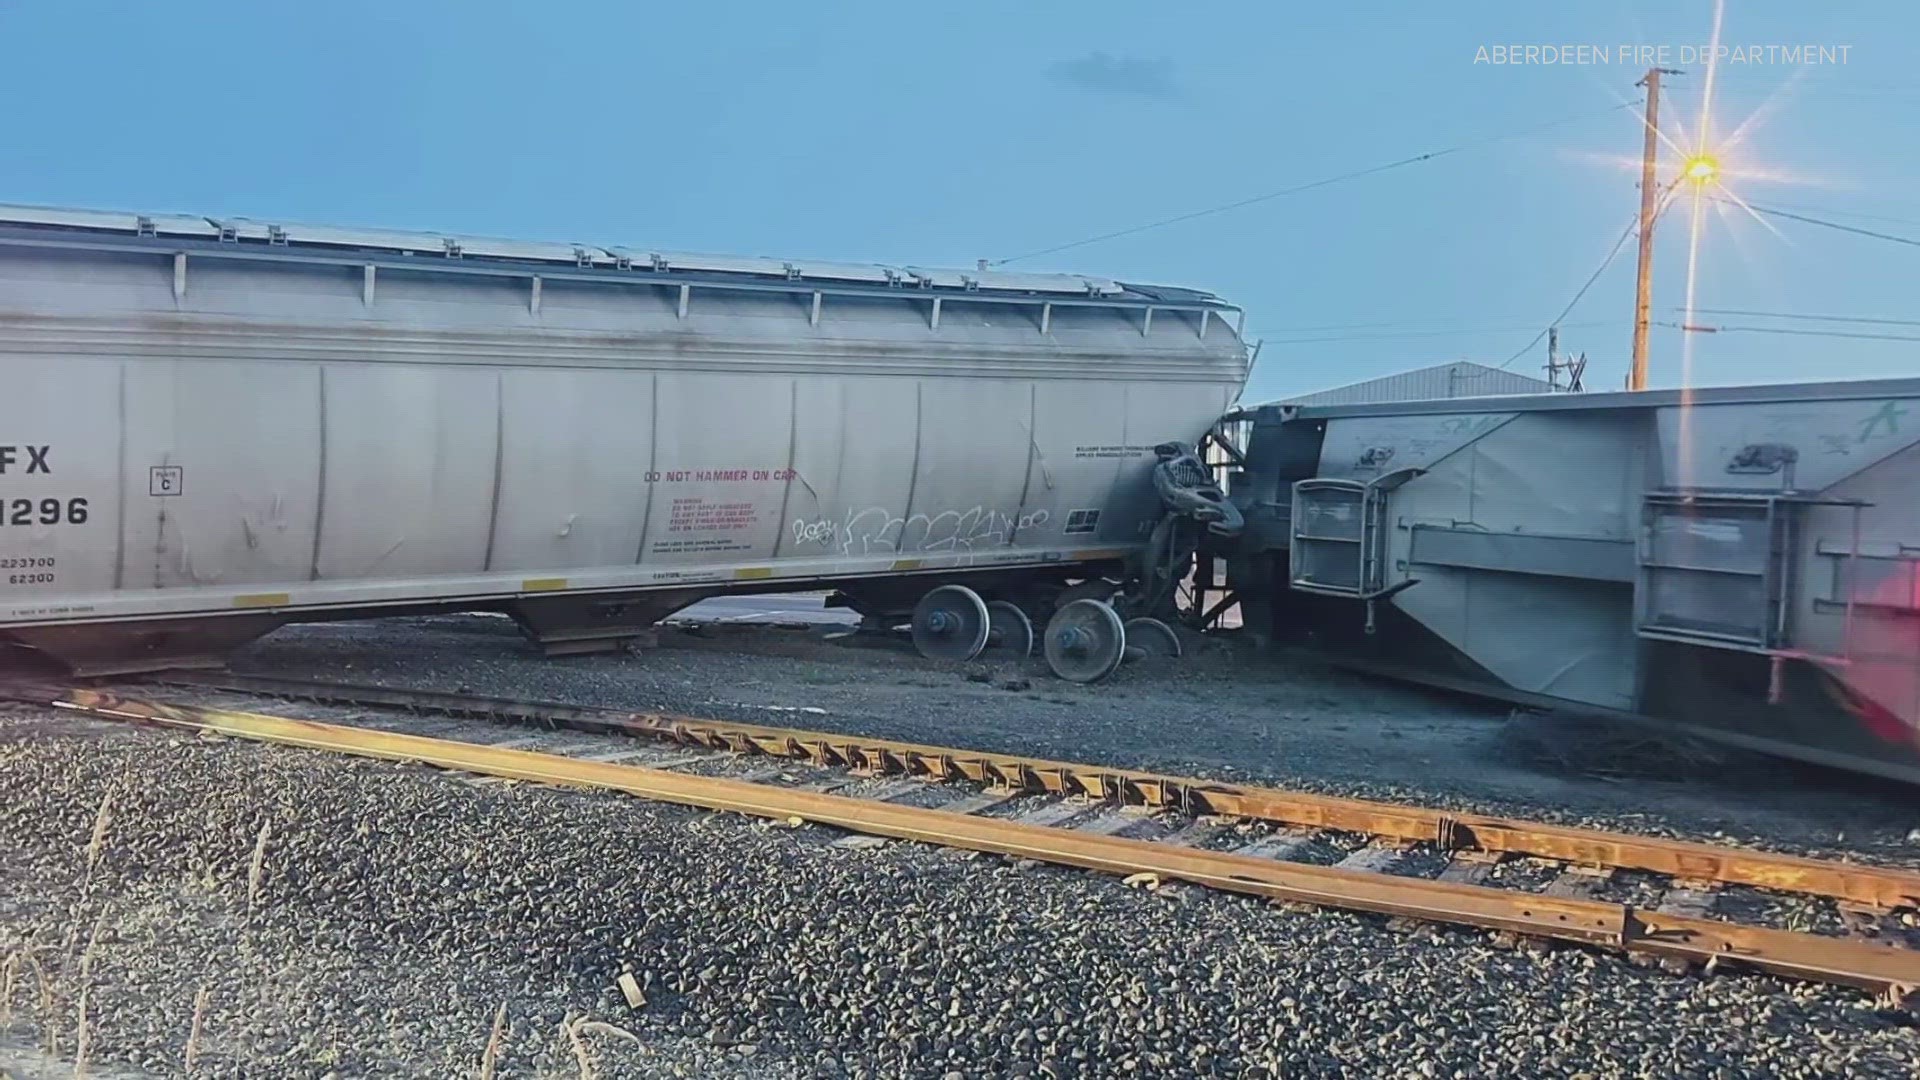 5 rail cars and one locomotive derailed in an accident.